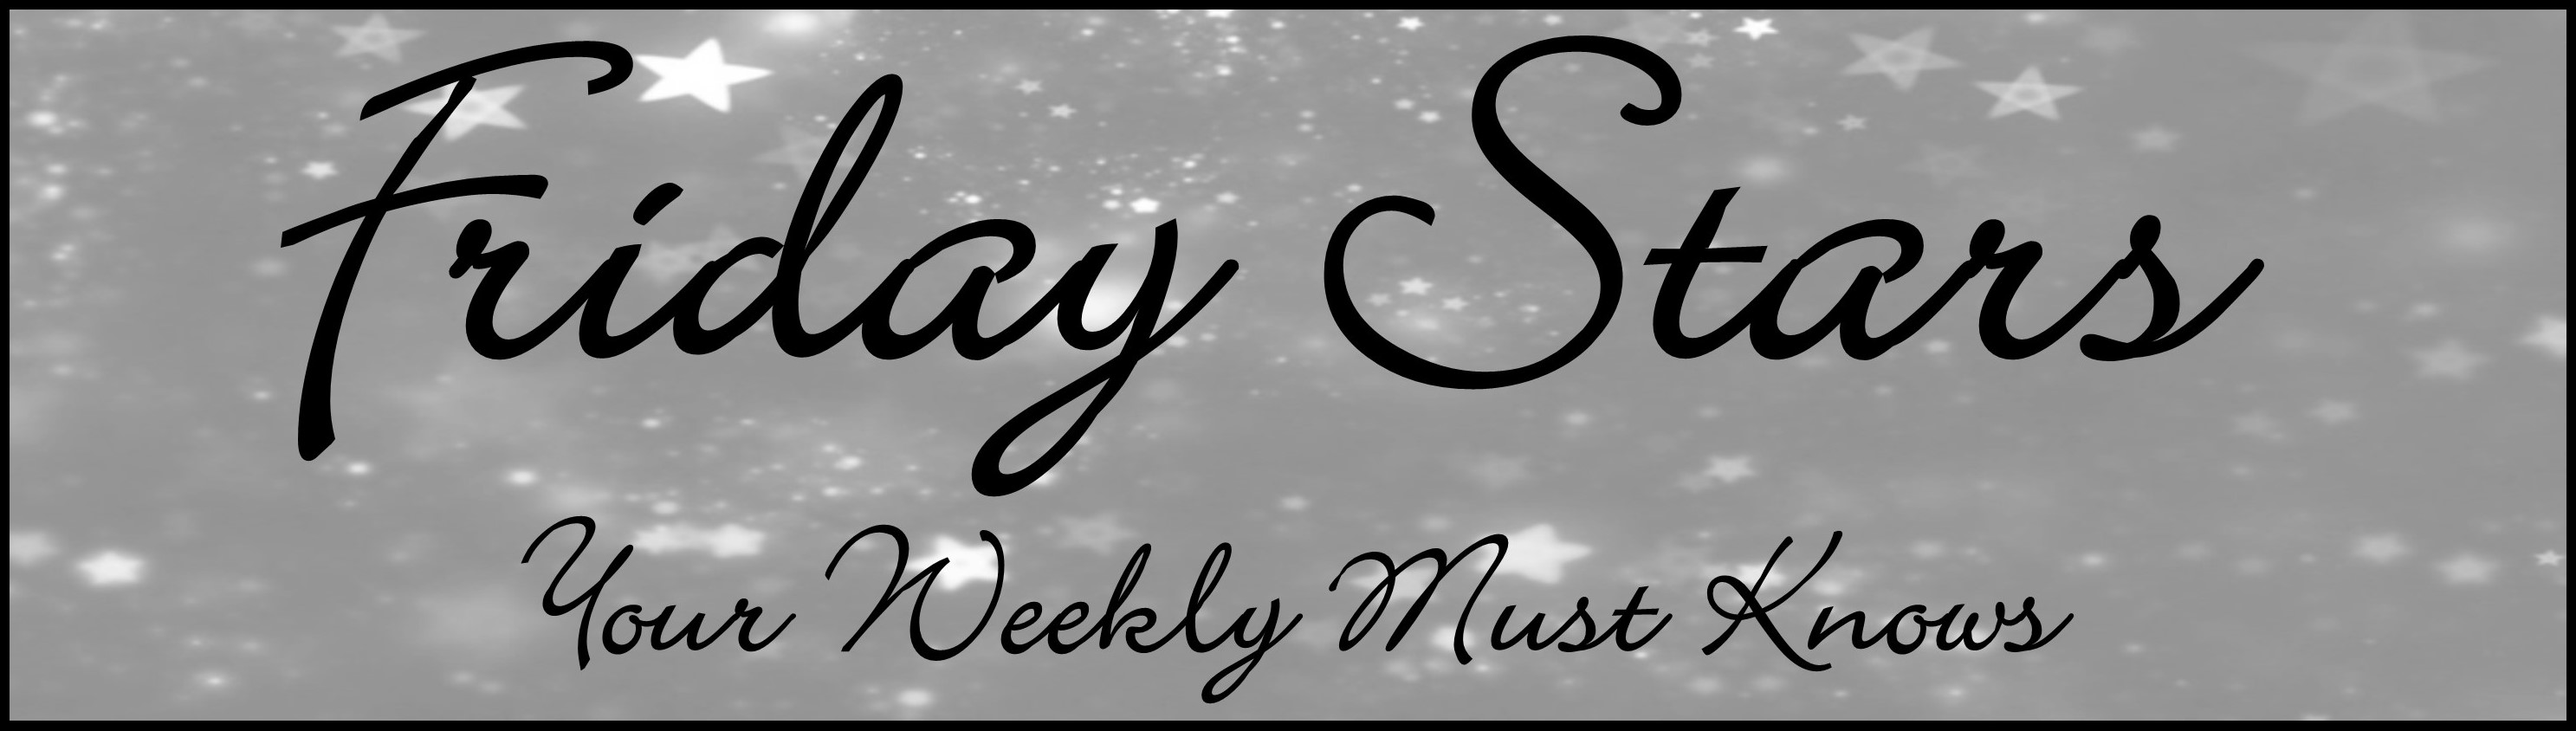 FRIDAY STARS – Your Weekly Must Knows 08/21/15